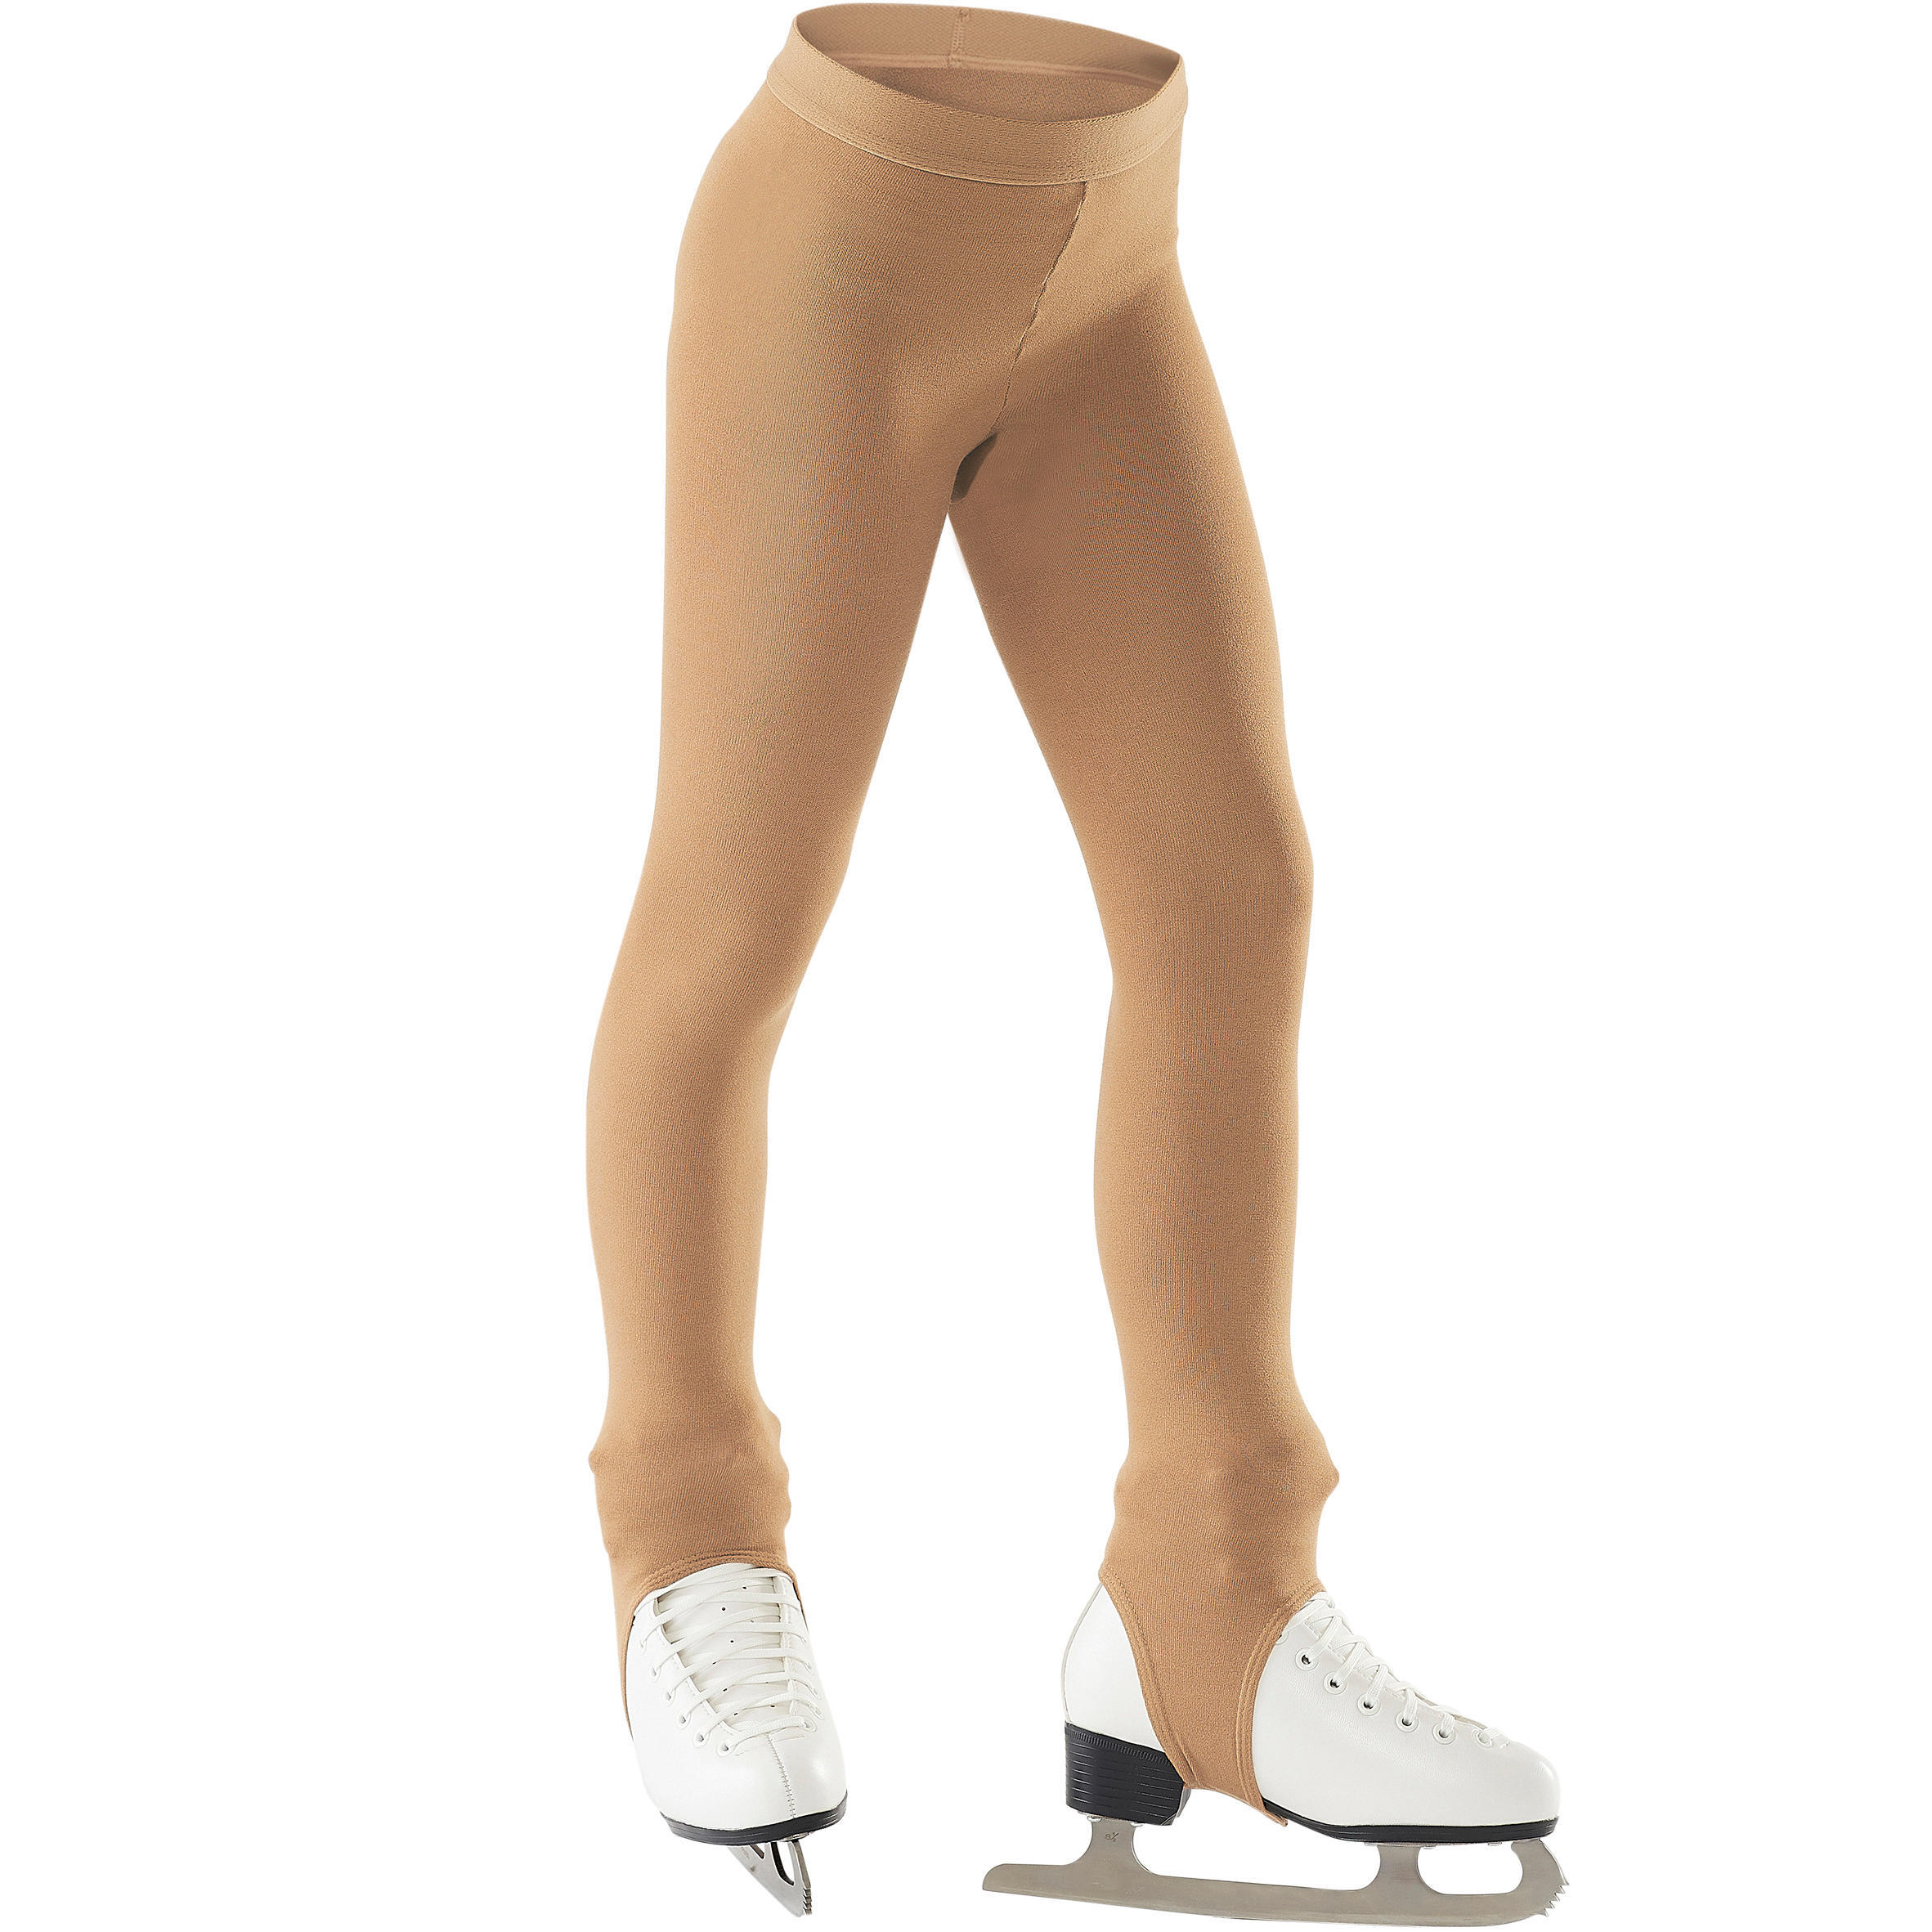 OXELO Kids' Figure Skating Training Tights